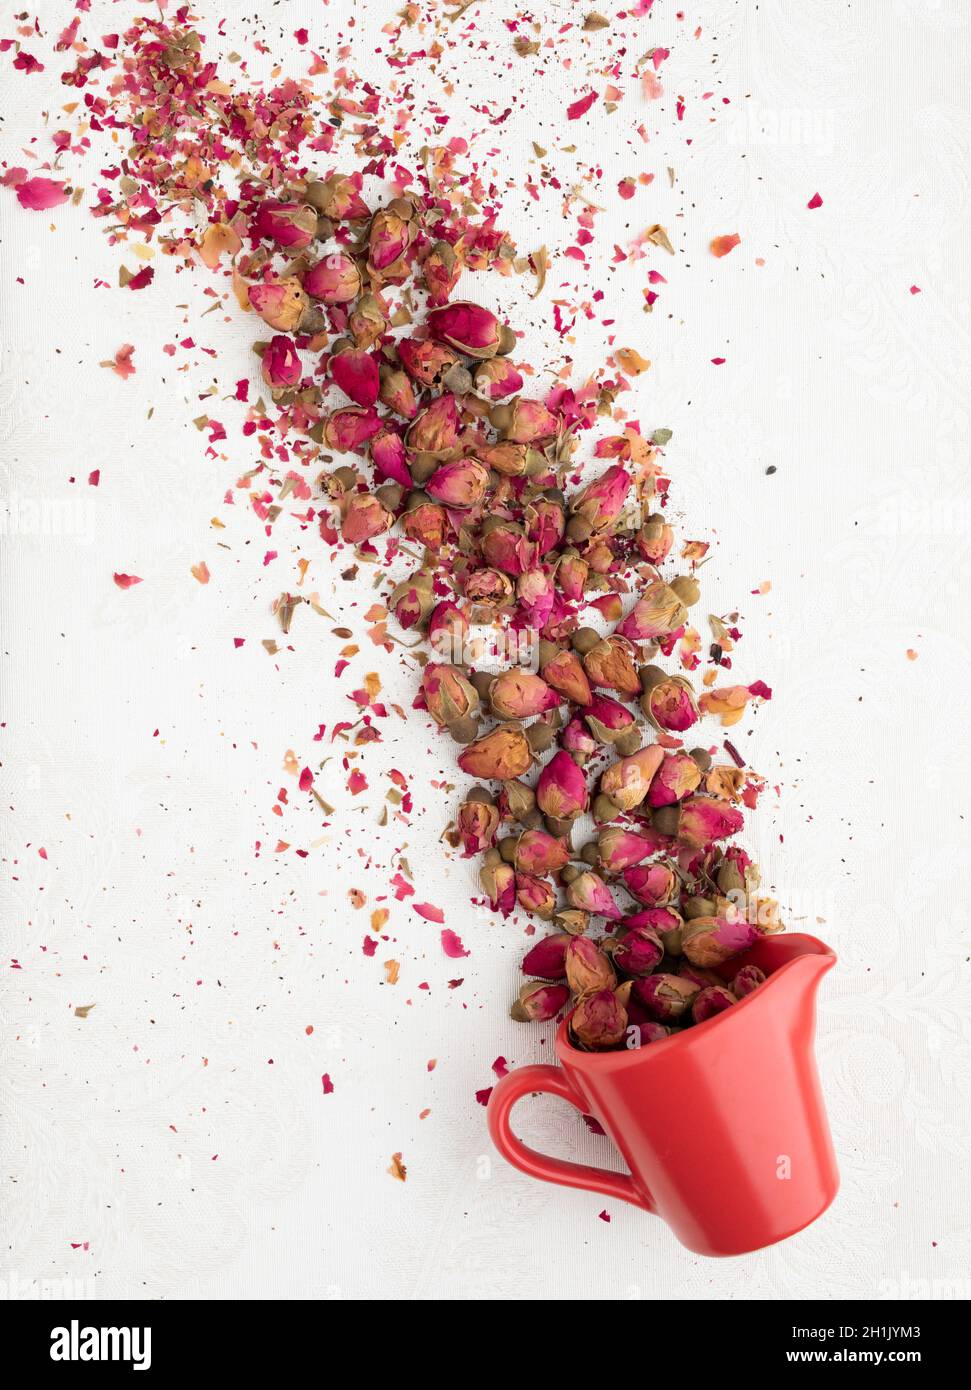 A cup of small red Mohammedan roses Stock Photo